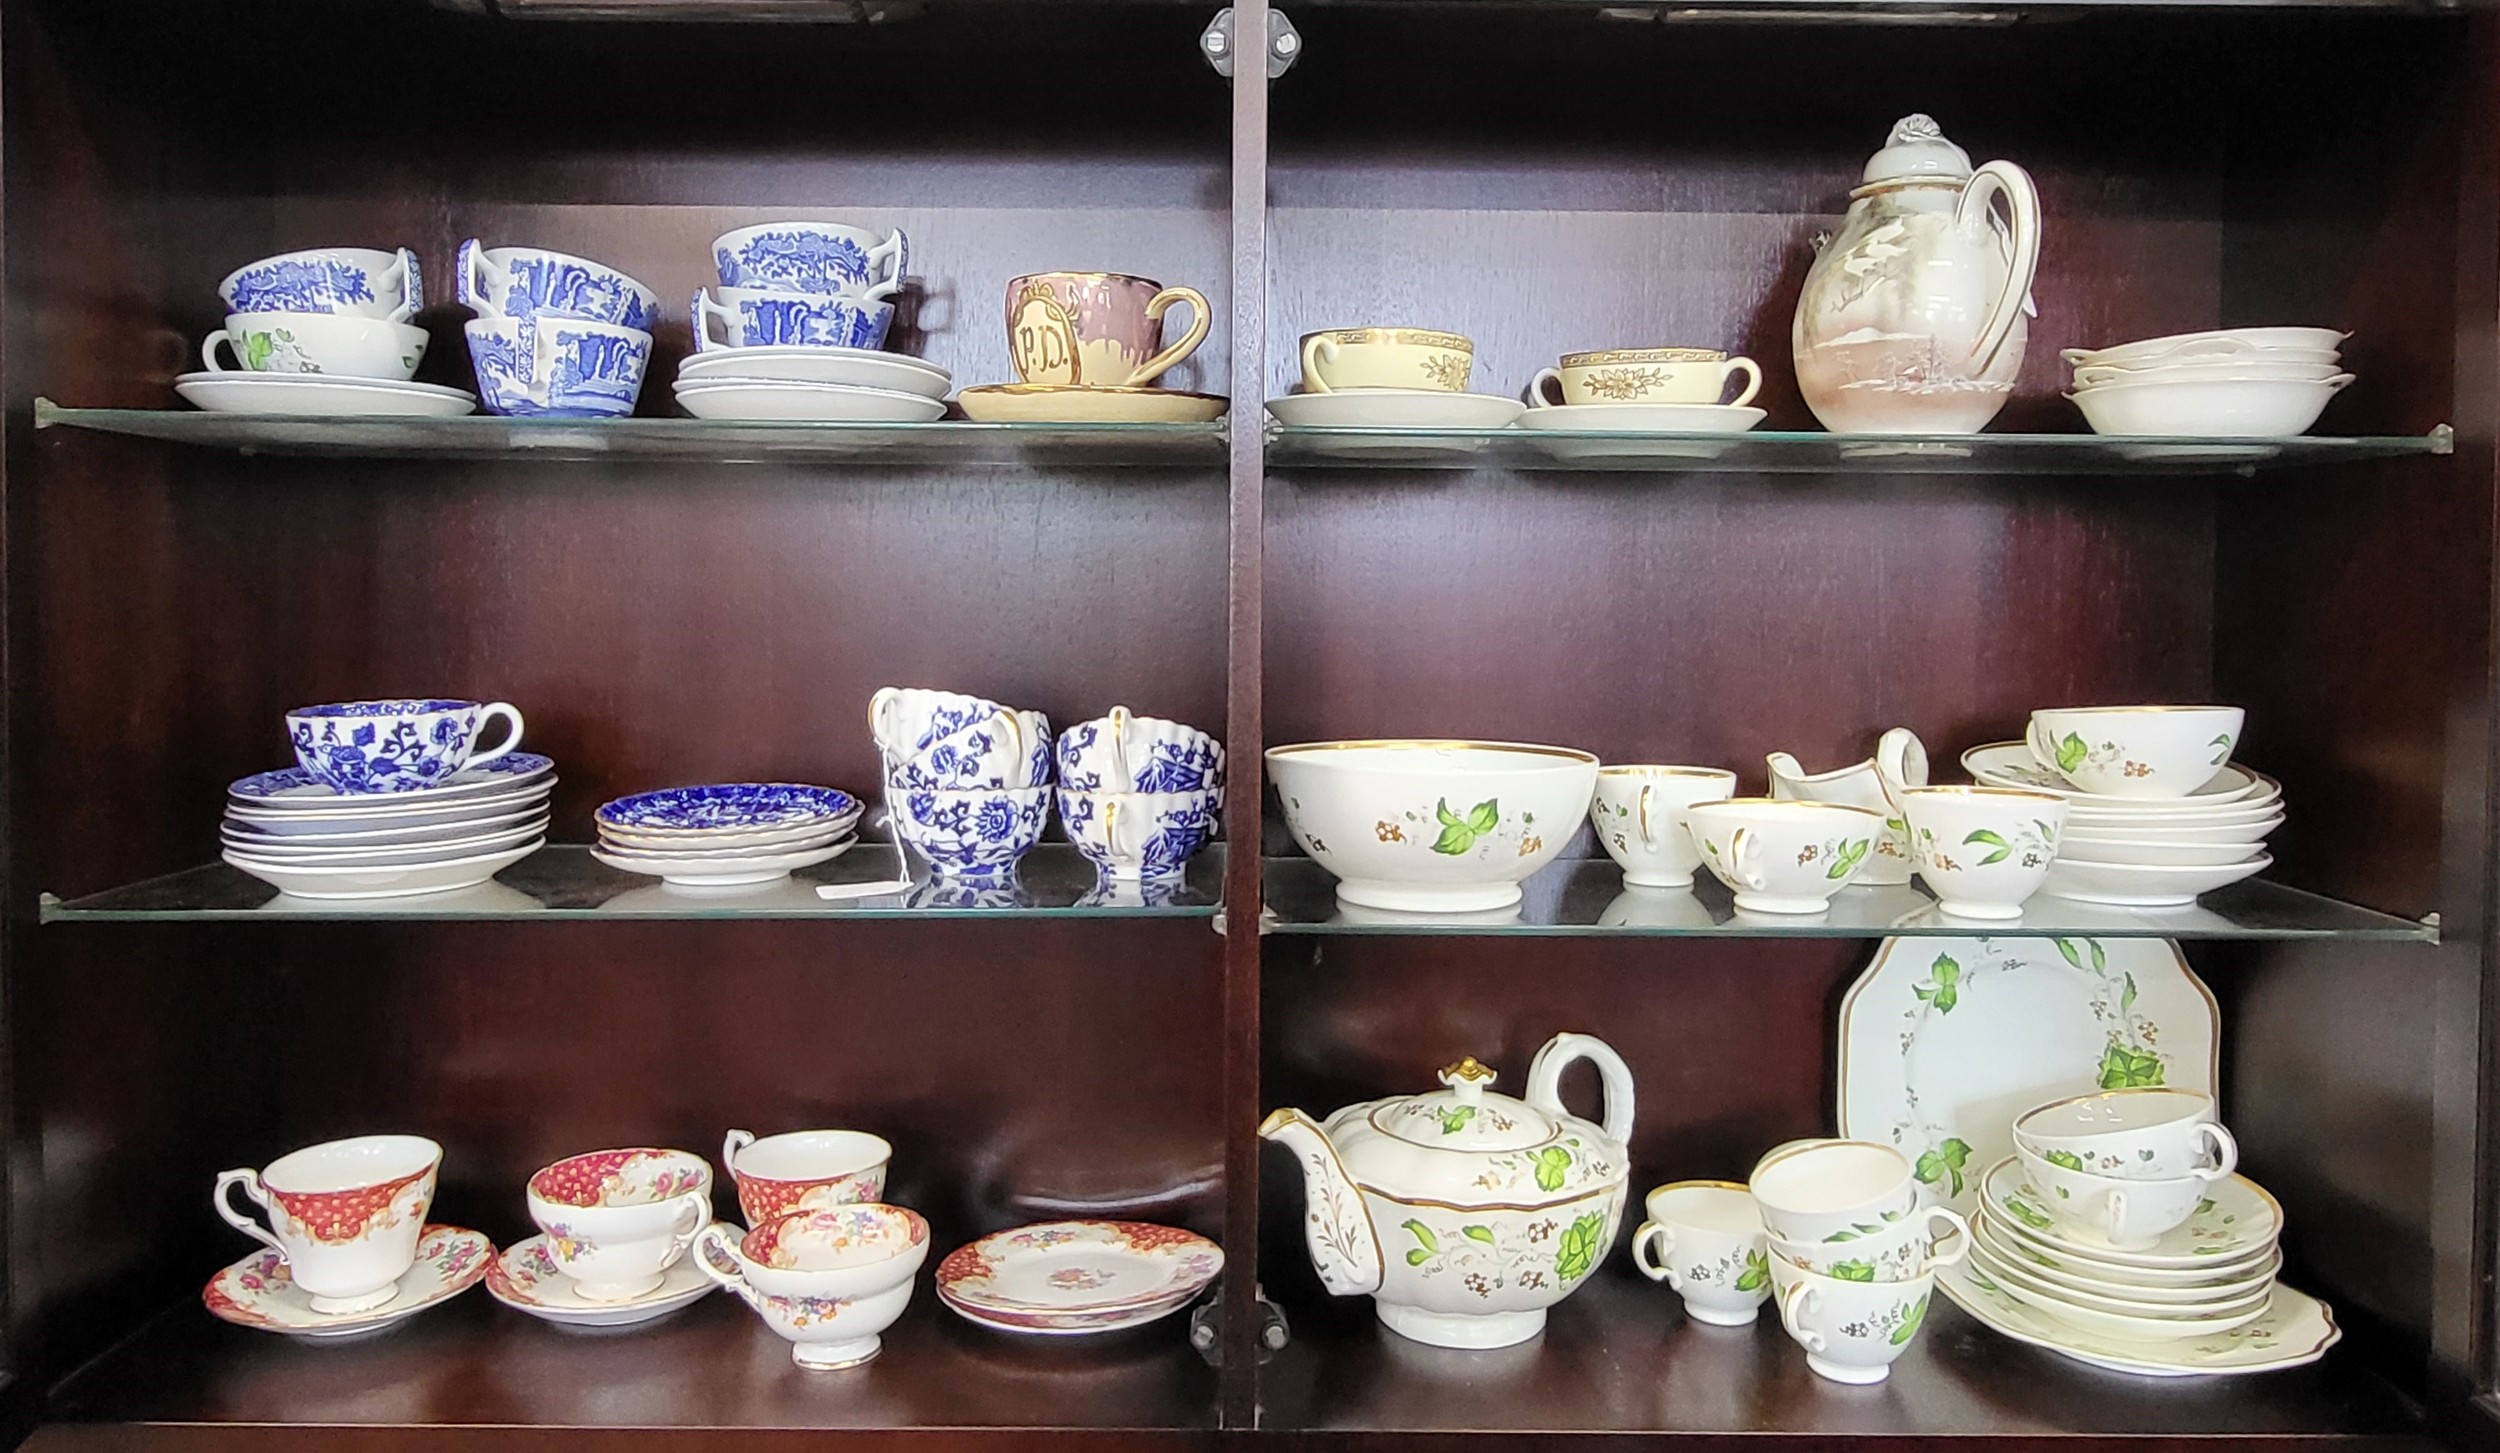 Porcelain cups and saucers including Spode and Paragon, a tea set and a Japanese coffee pot. (75)